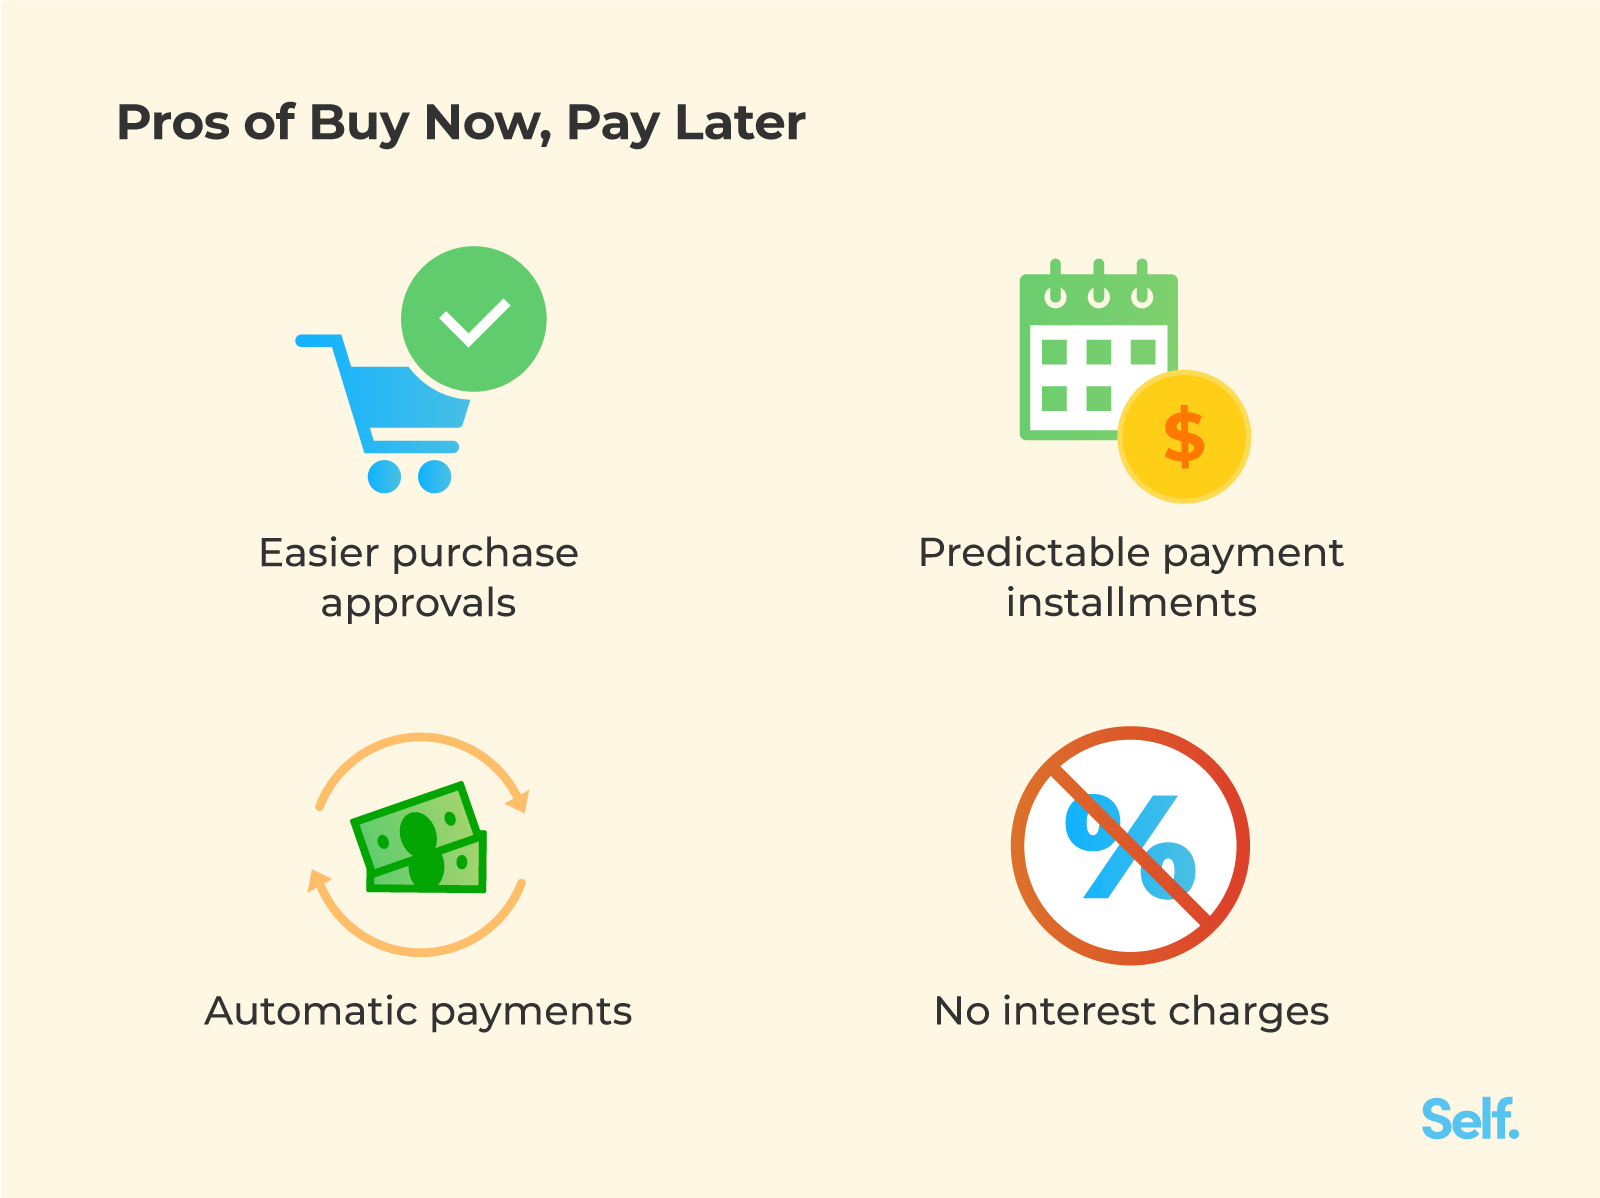 Buy Now, Pay Later Usage Increases as Provider Options Expand